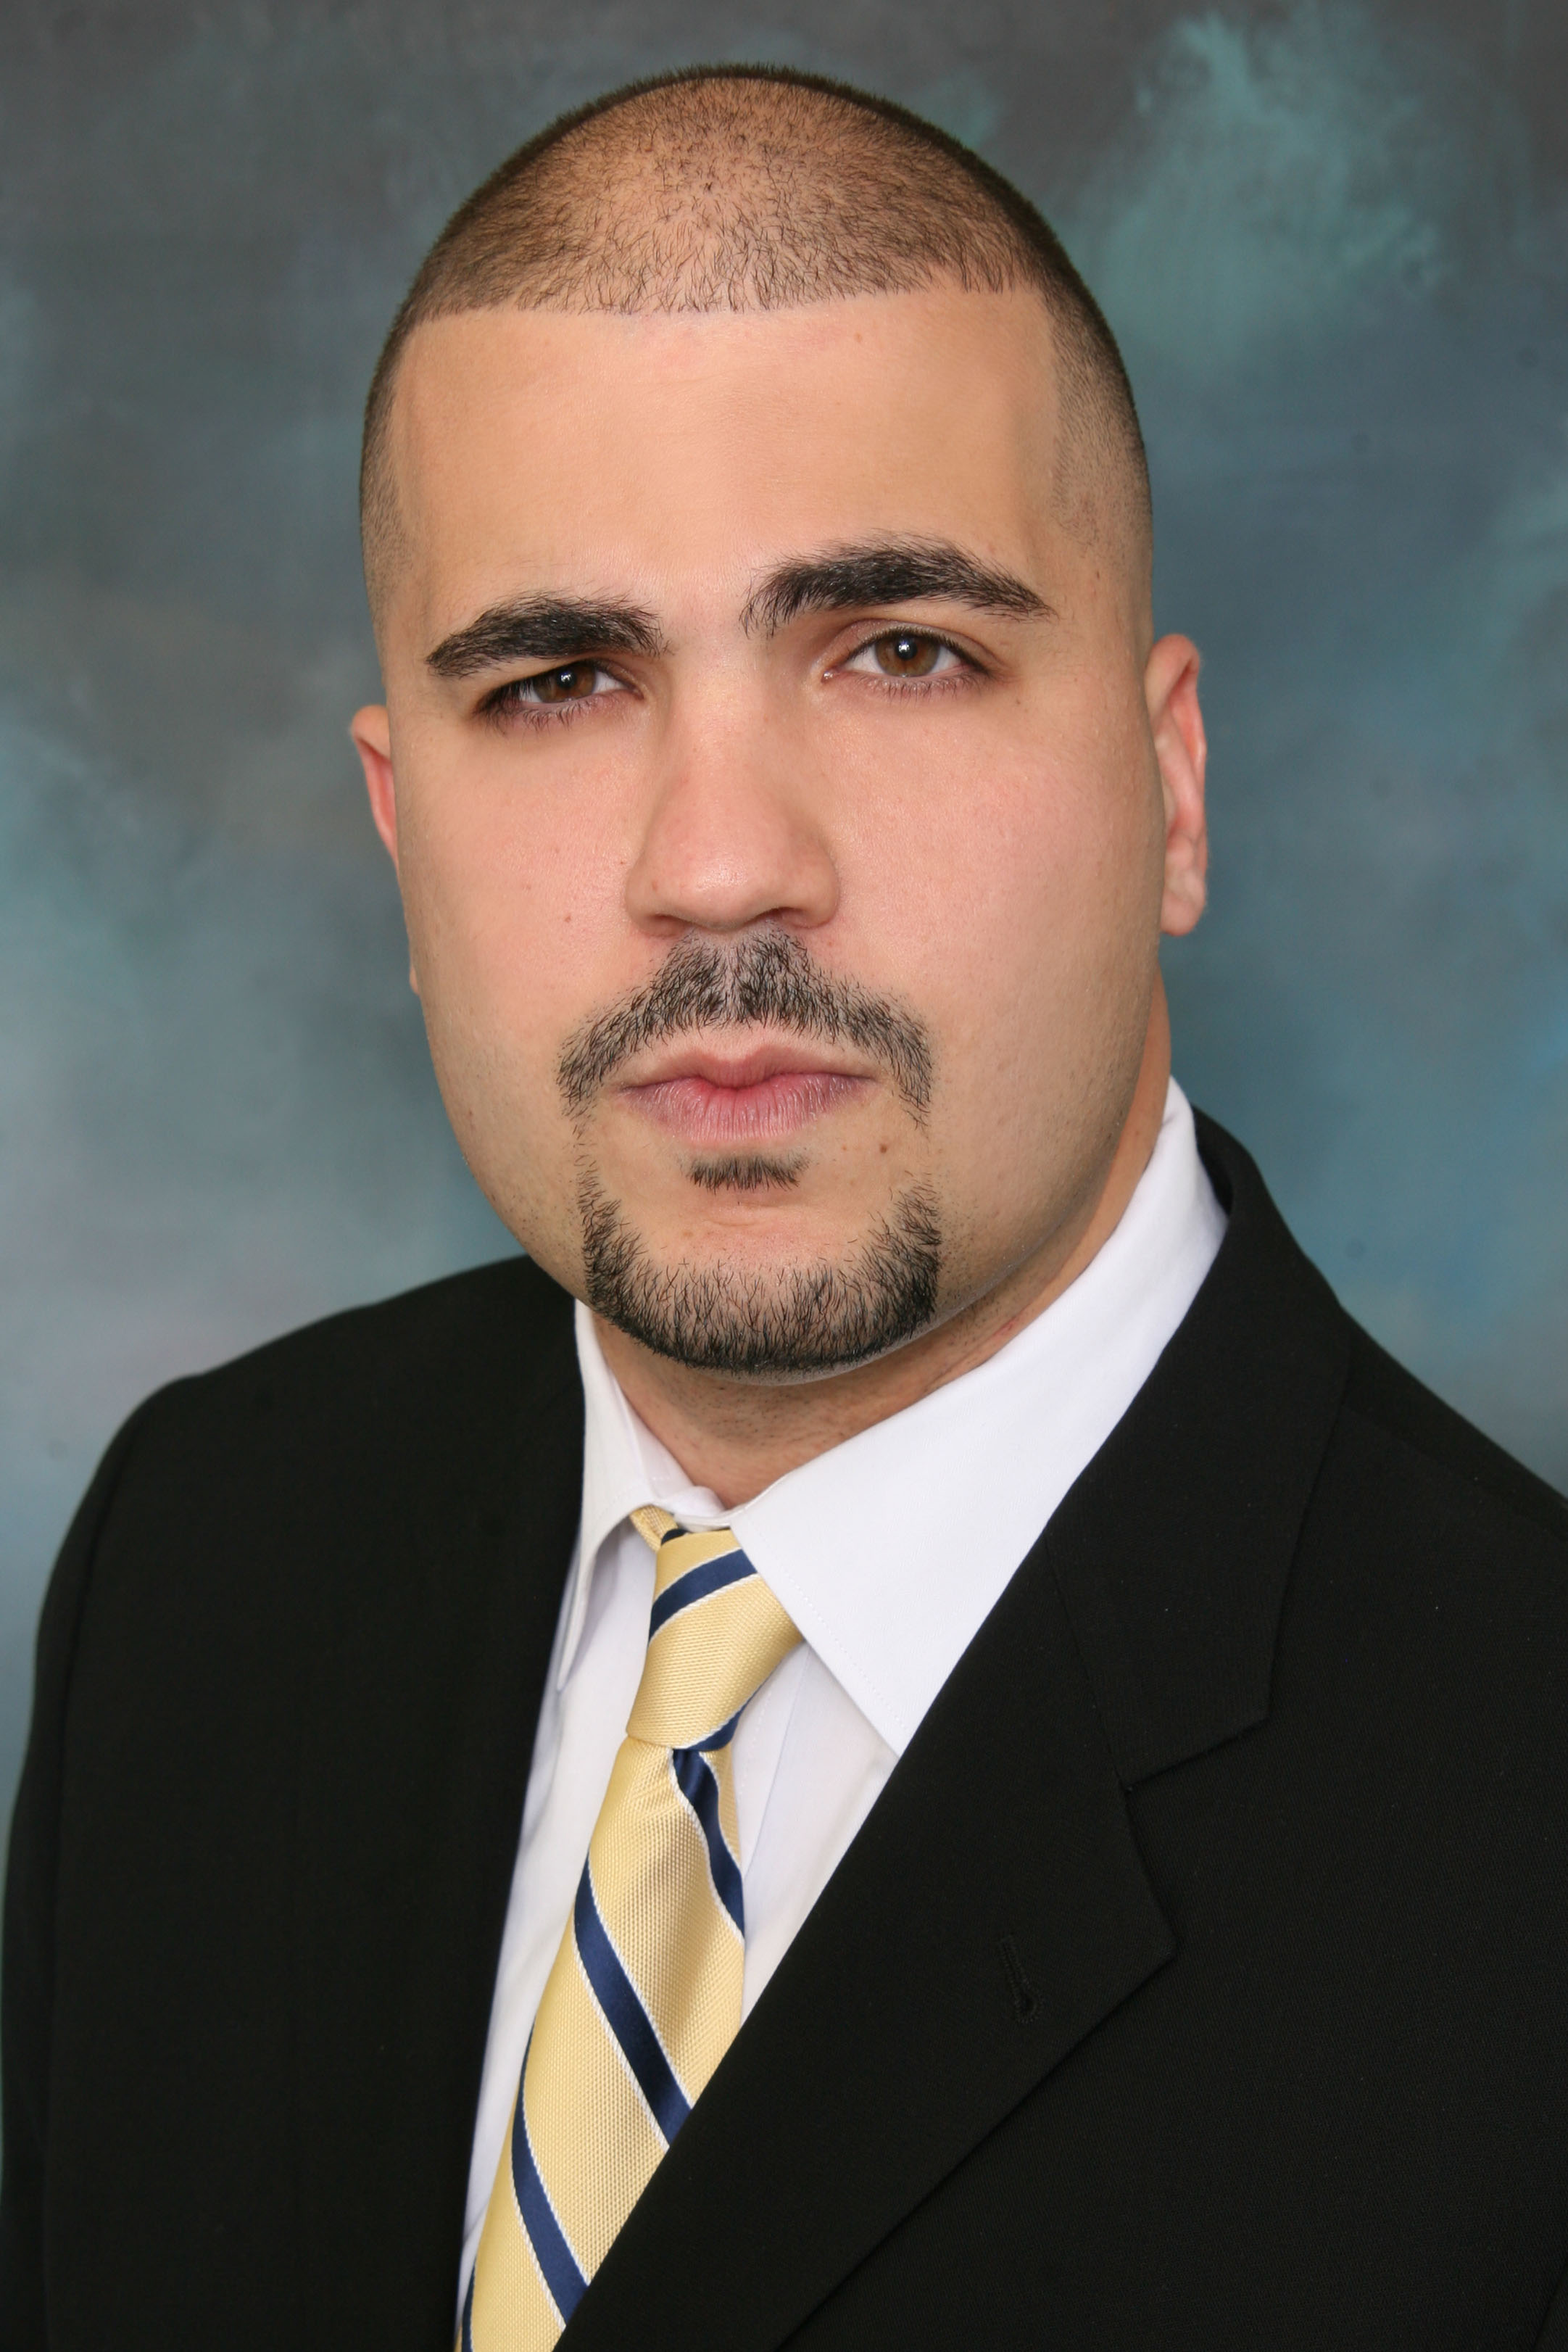 Appointed to the ISBA's Standing Committee on Judicial Evaluations, Tony S. Kalogerakos, is president of the Assyrian-American Bar Association, and has been recognized as an Illinois Emerging Lawyer.